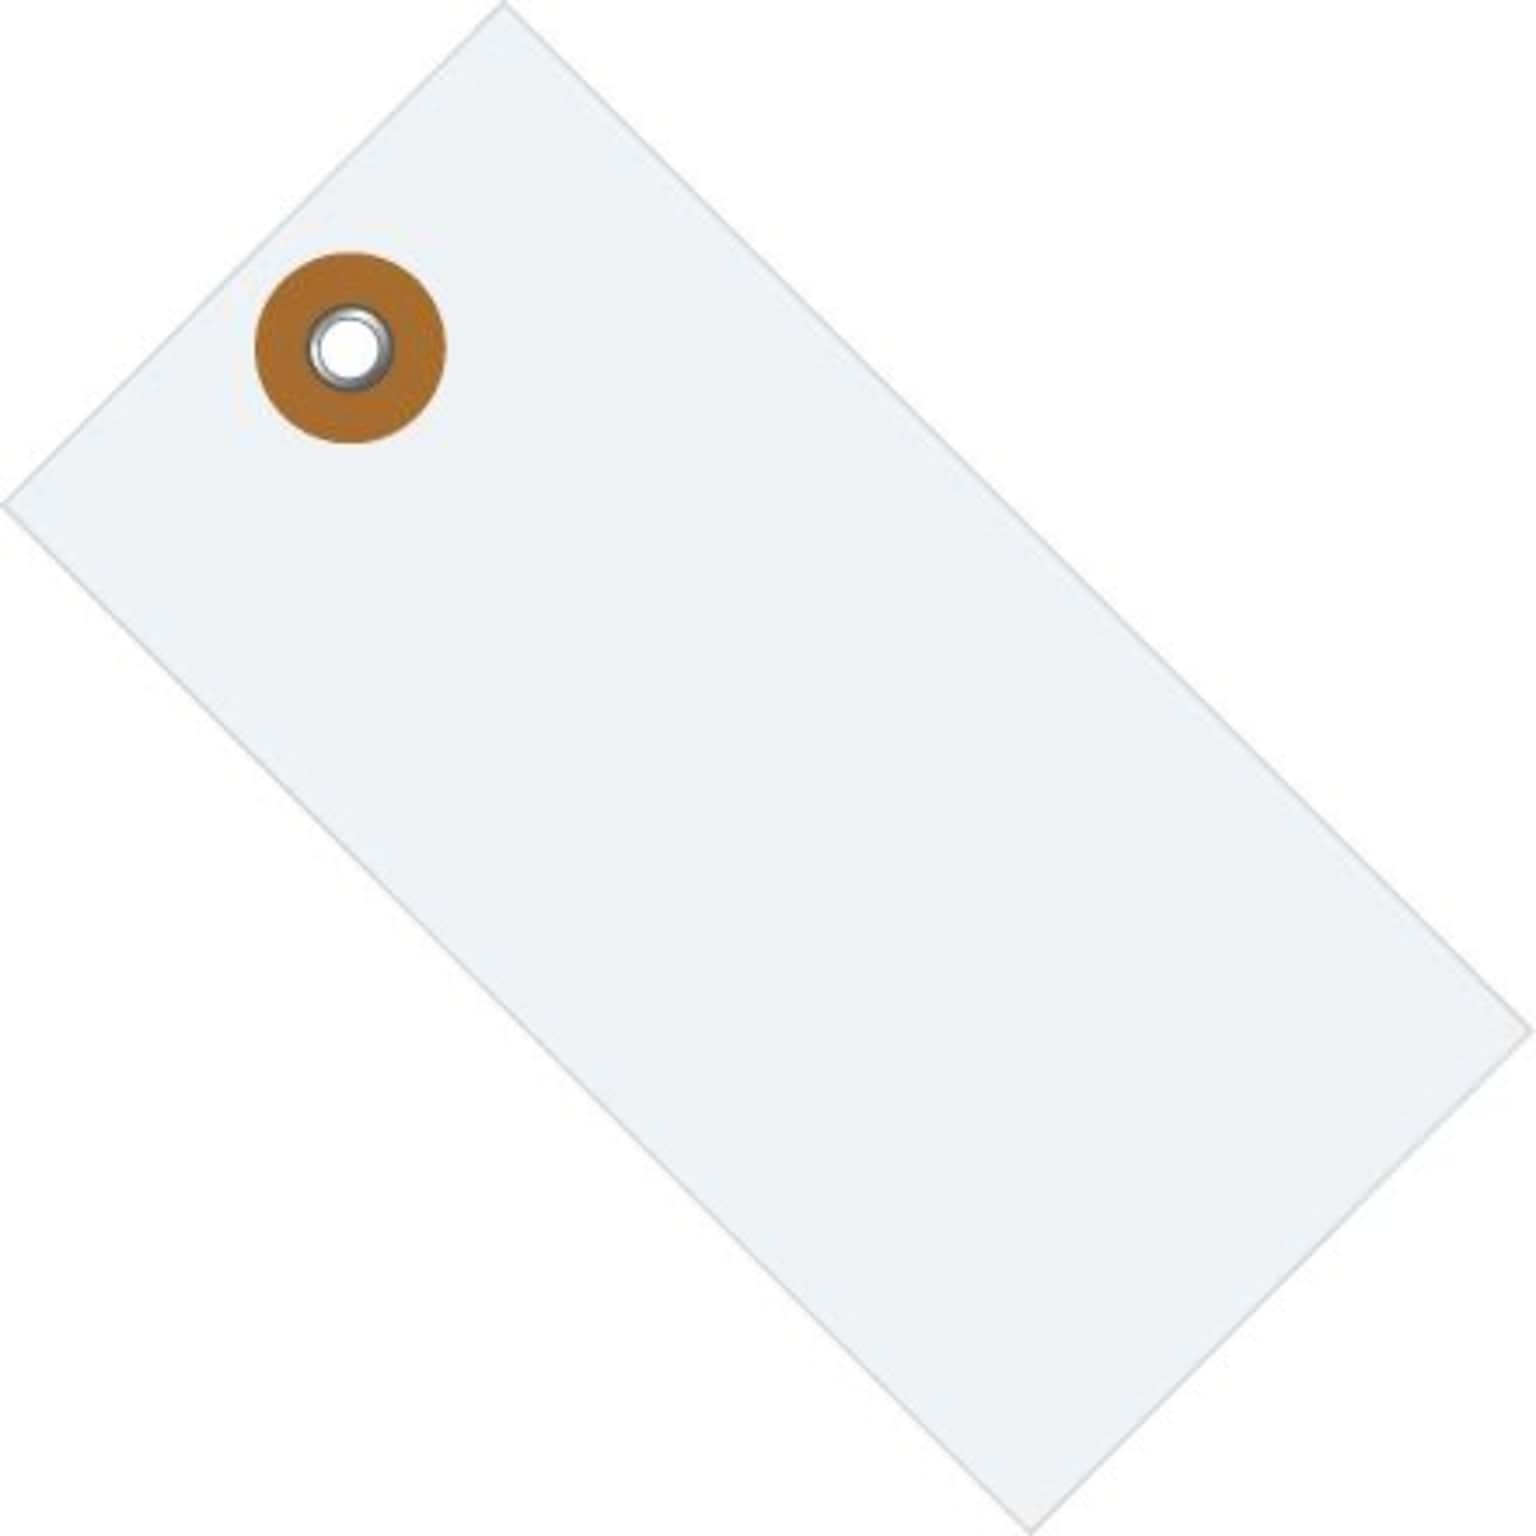 Quill Brand® Tyvek Shipping Tag, 4 3/4 x 2 3/8, White, 1000/Case (G13051)